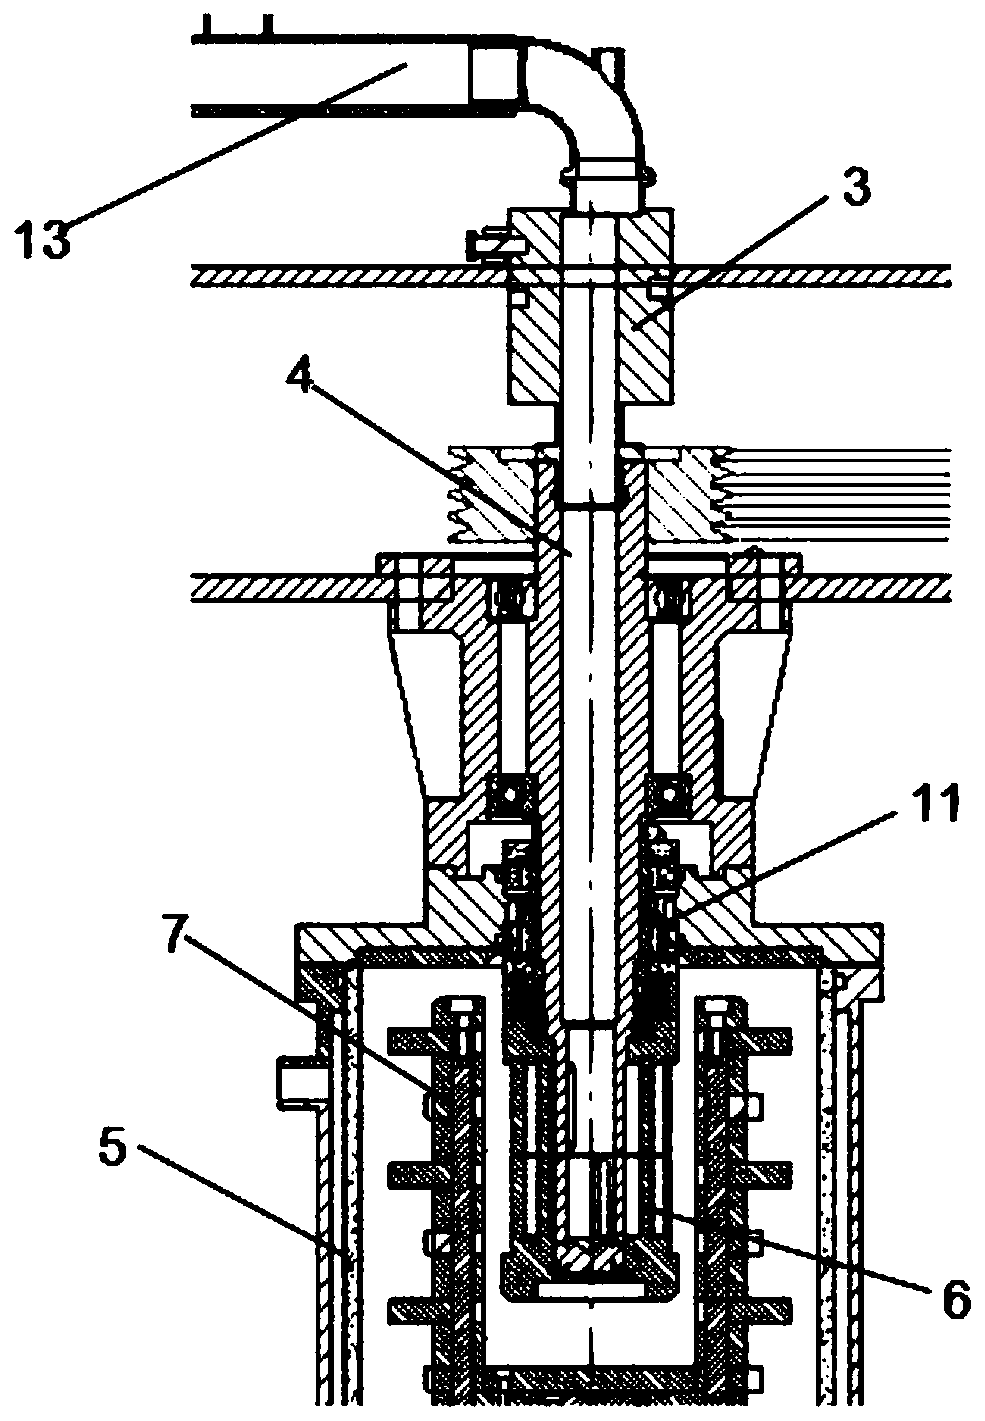 Vertical centrifugal separation discharge grinding system